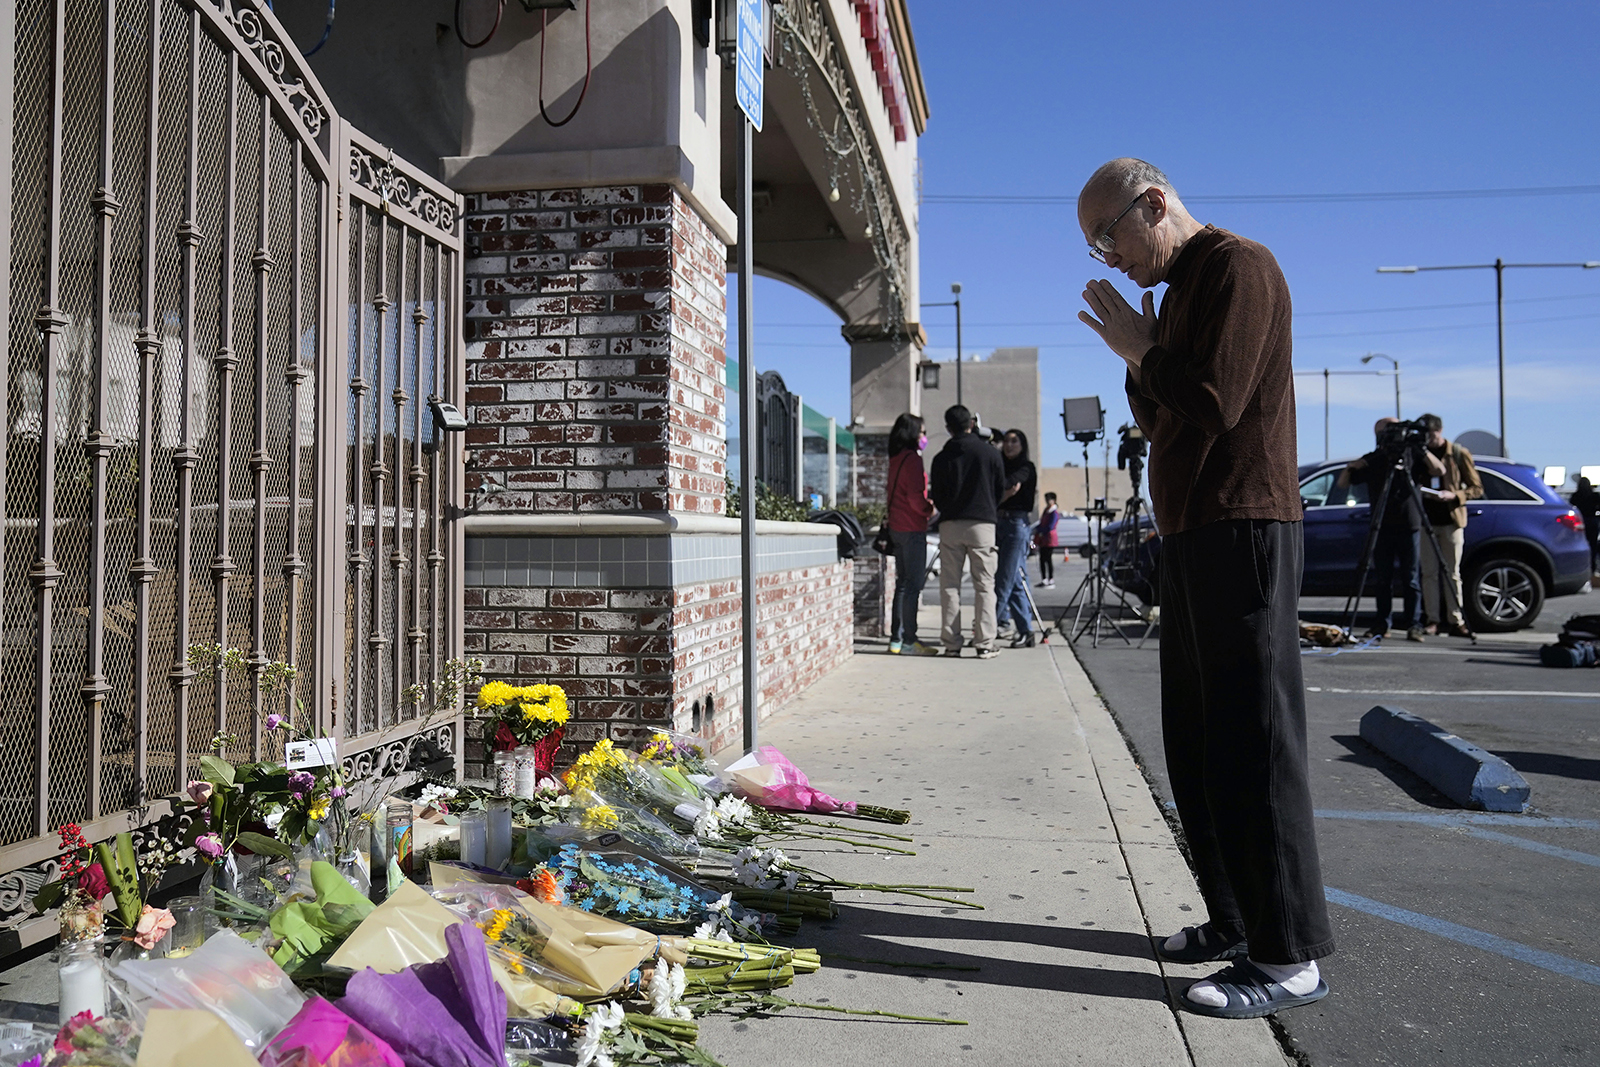 Kenny Loo, 71, prays outside Star Ballroom Dance Studio on Jan. 23, 2023, for the victims killed two days before in the shooting in Monterey Park, California. Authorities searched for a motive for the gunman who killed multiple people at the ballroom dance studio during Lunar New Year celebrations, slayings that sent a wave of fear through Asian American communities and cast a shadow over festivities nationwide. (AP Photo/Jae C. Hong)